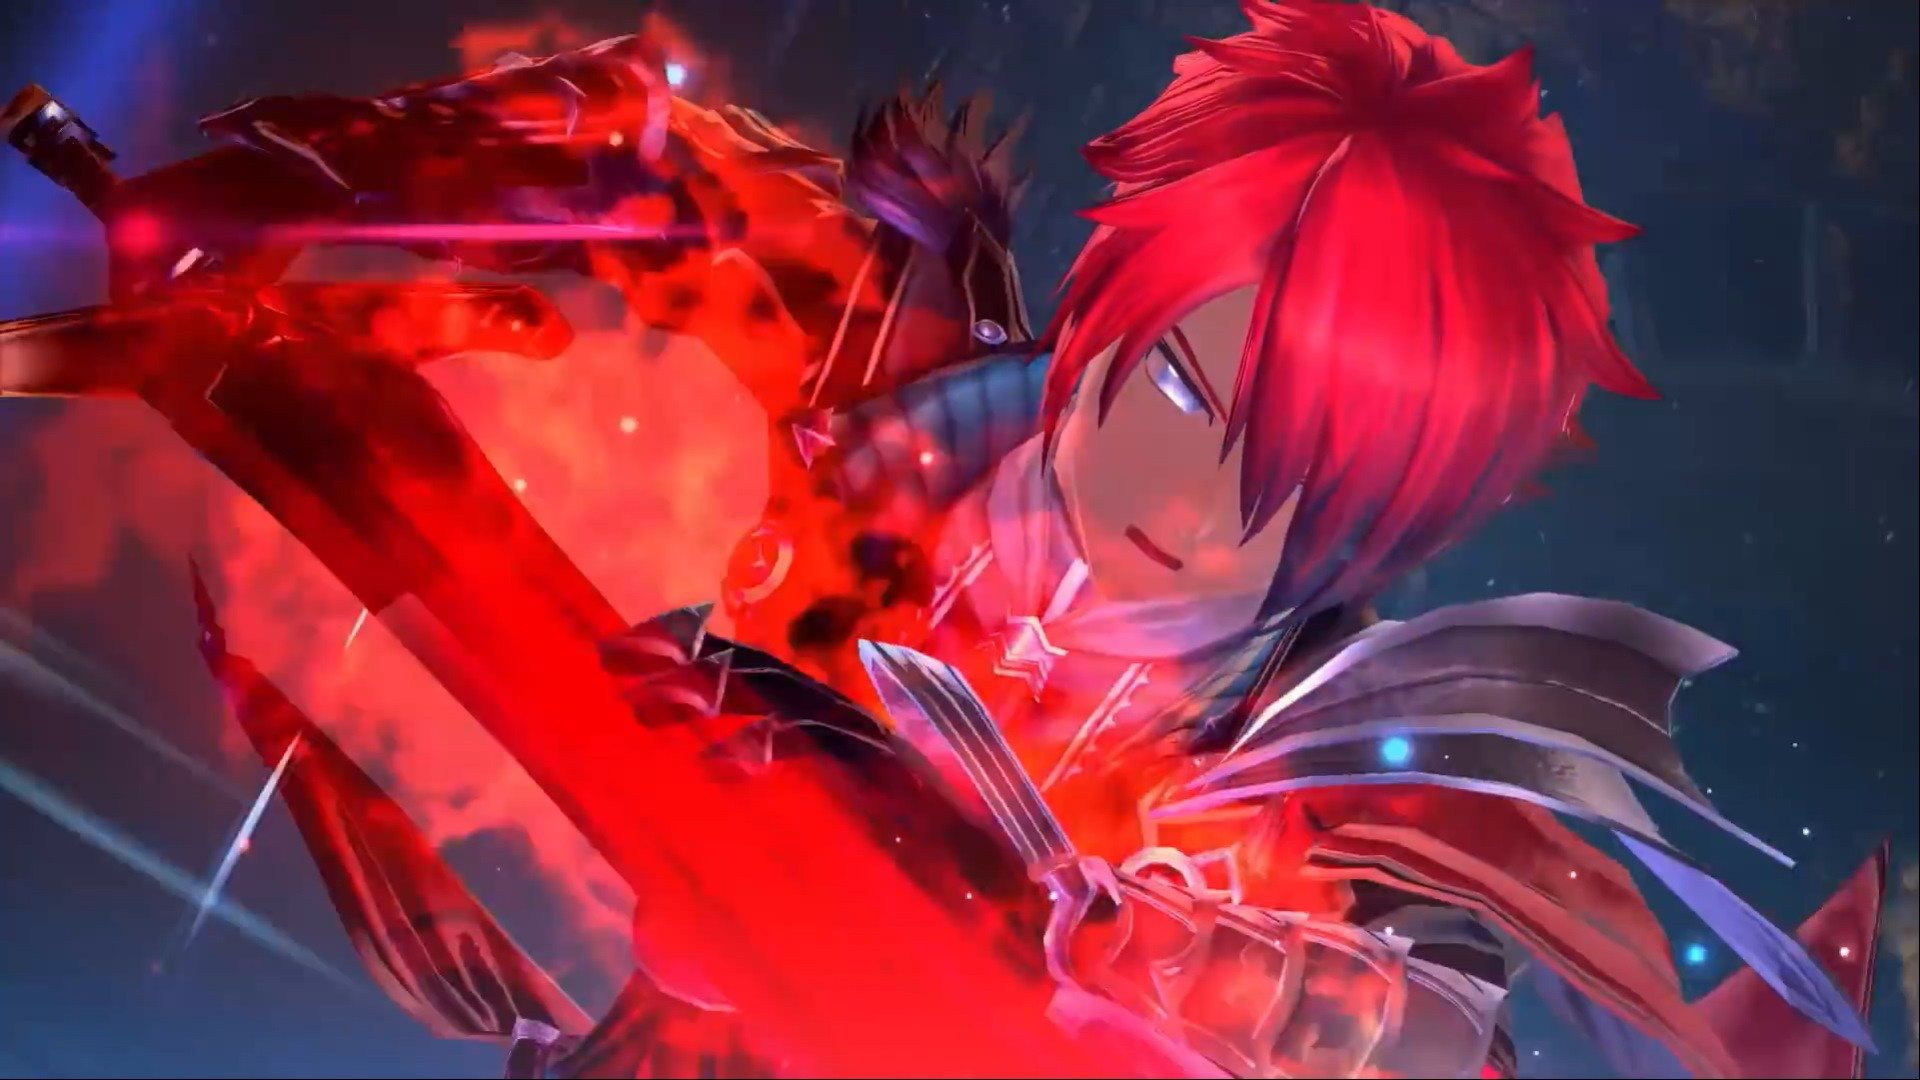 Action RPG, Ys IX: Monstrum Nox announced for western release in 2021